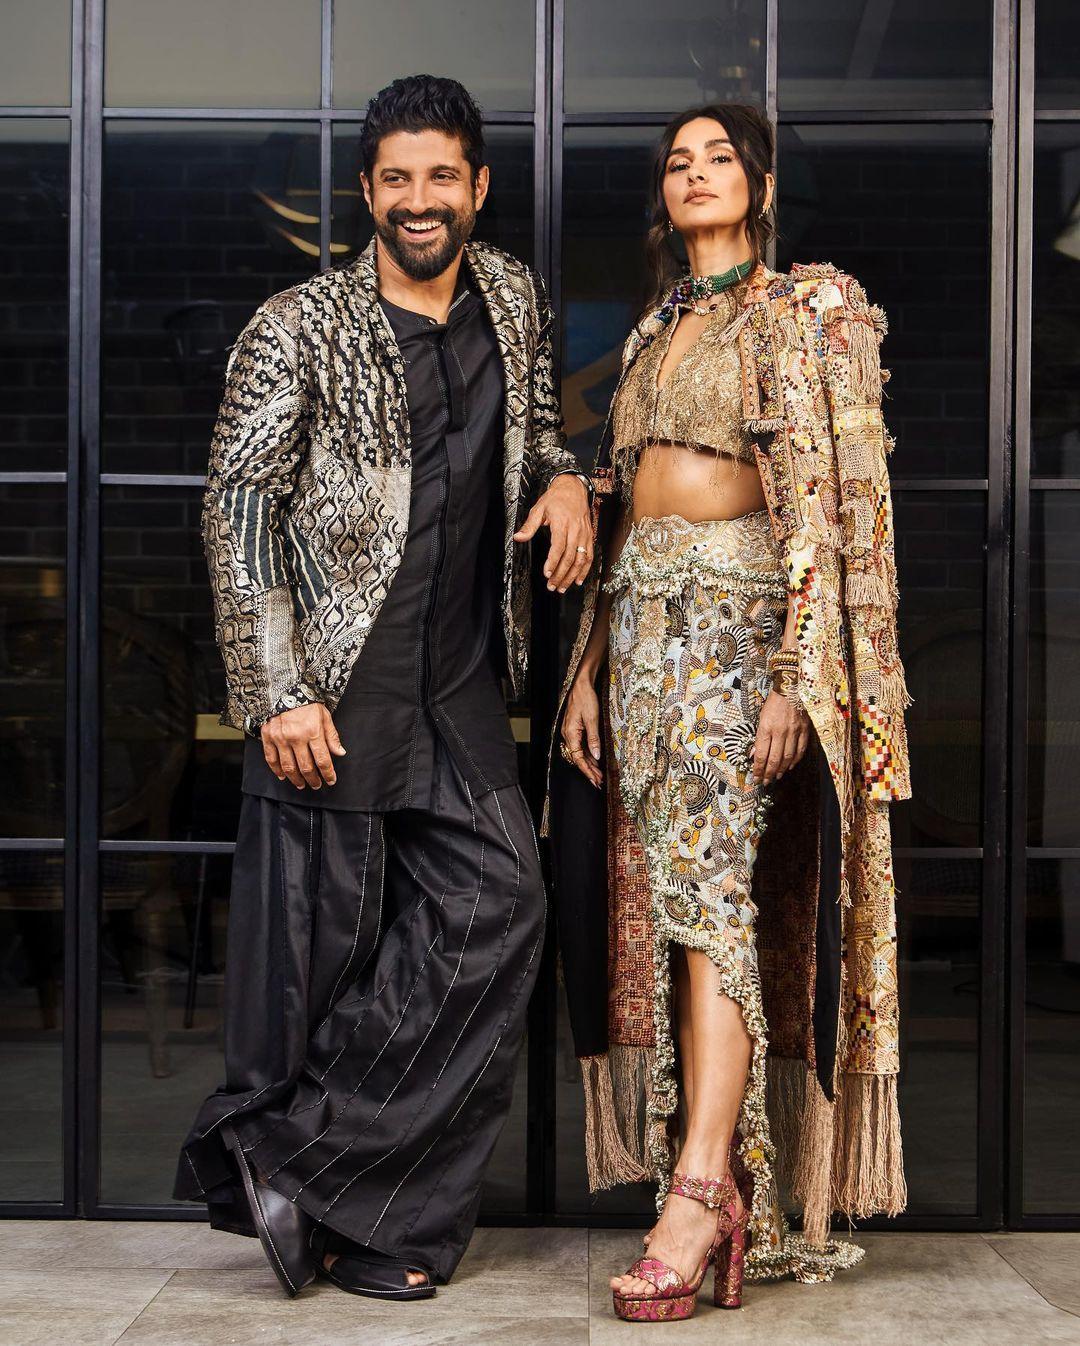 Shibani and Farhan are undoubtedly a power couple, and their pictures are proof of that. The chemistry and the way they complement each other are just wow